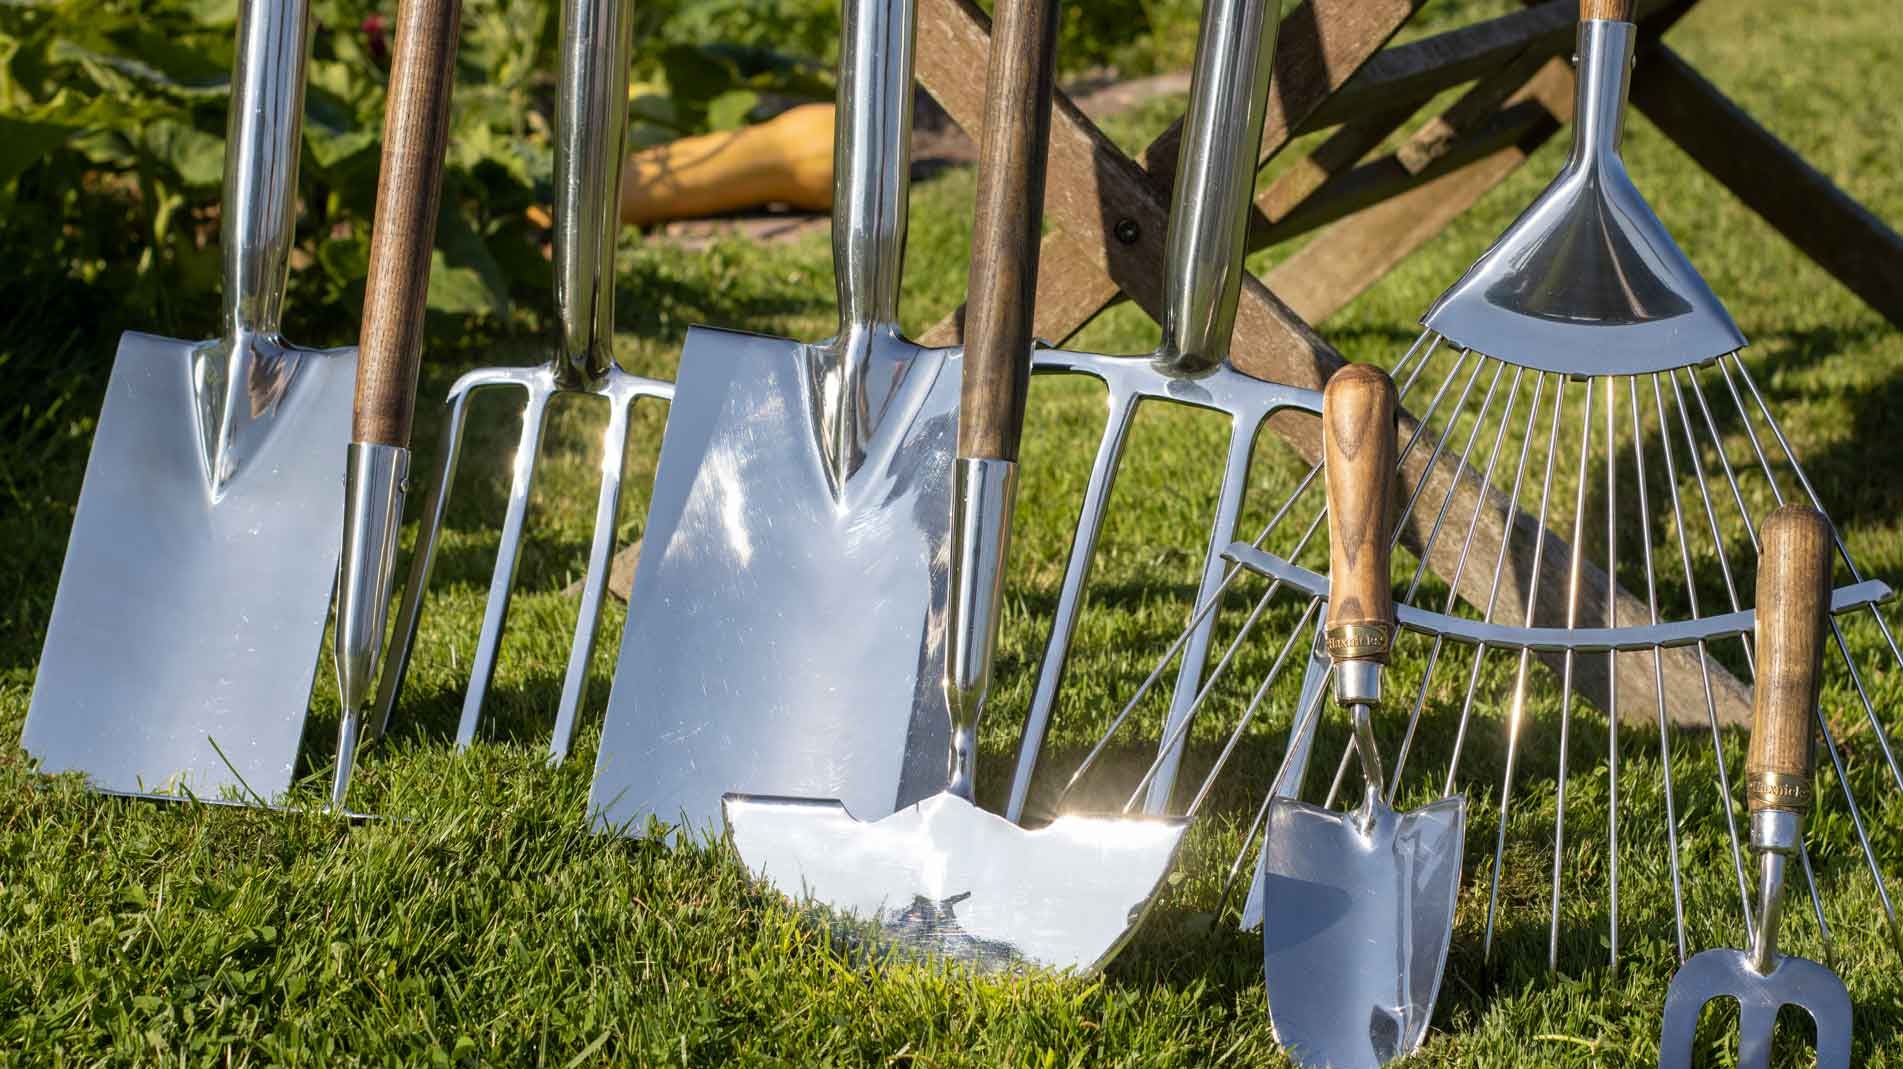 Introducing Haxnicks new traditionally crafted garden tools